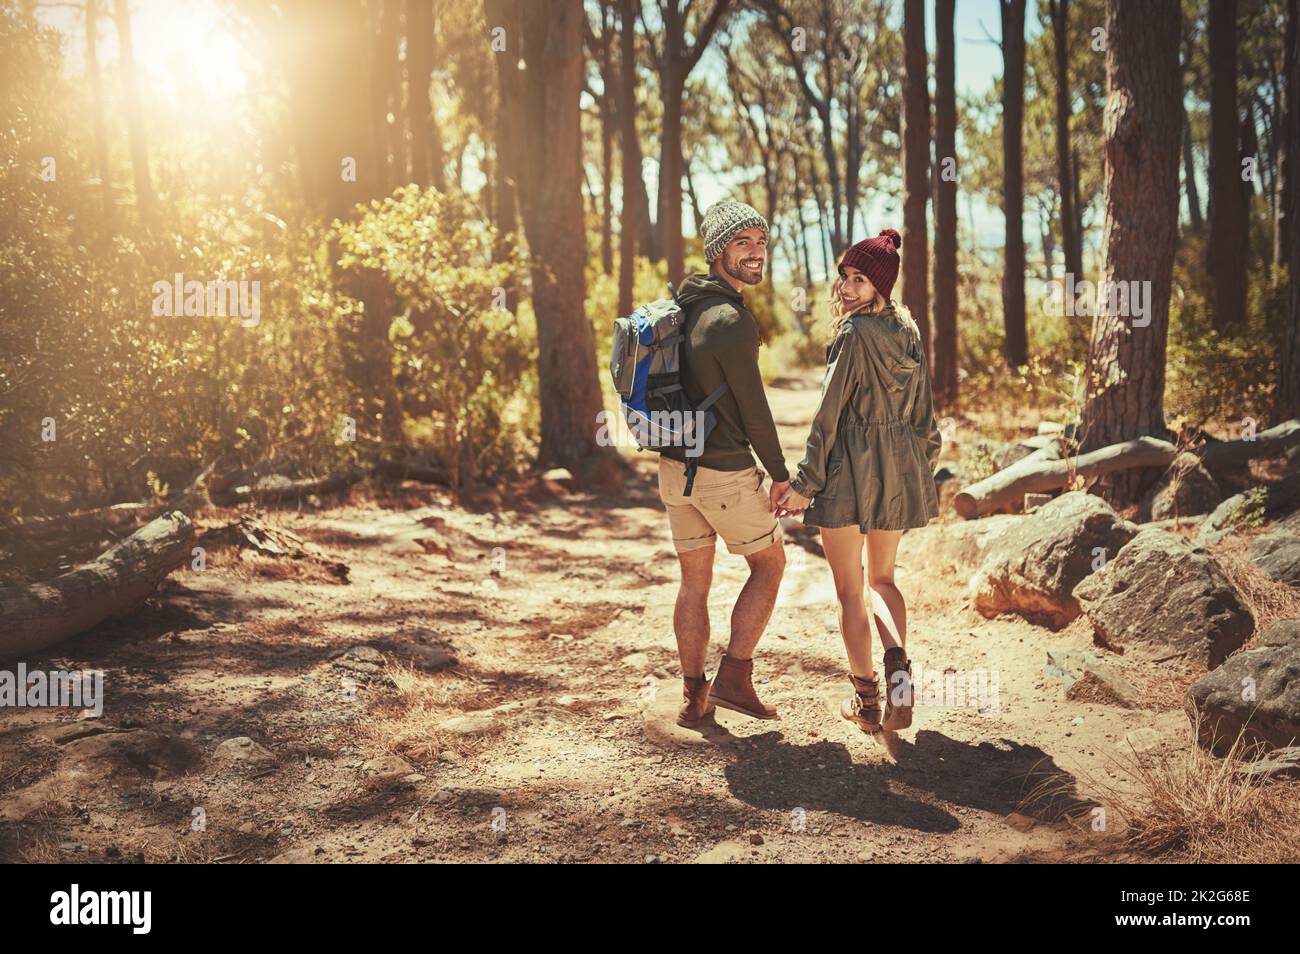 Not all those who wander are lost. Rearview shot of an affectionate young couple hiking. Stock Photo